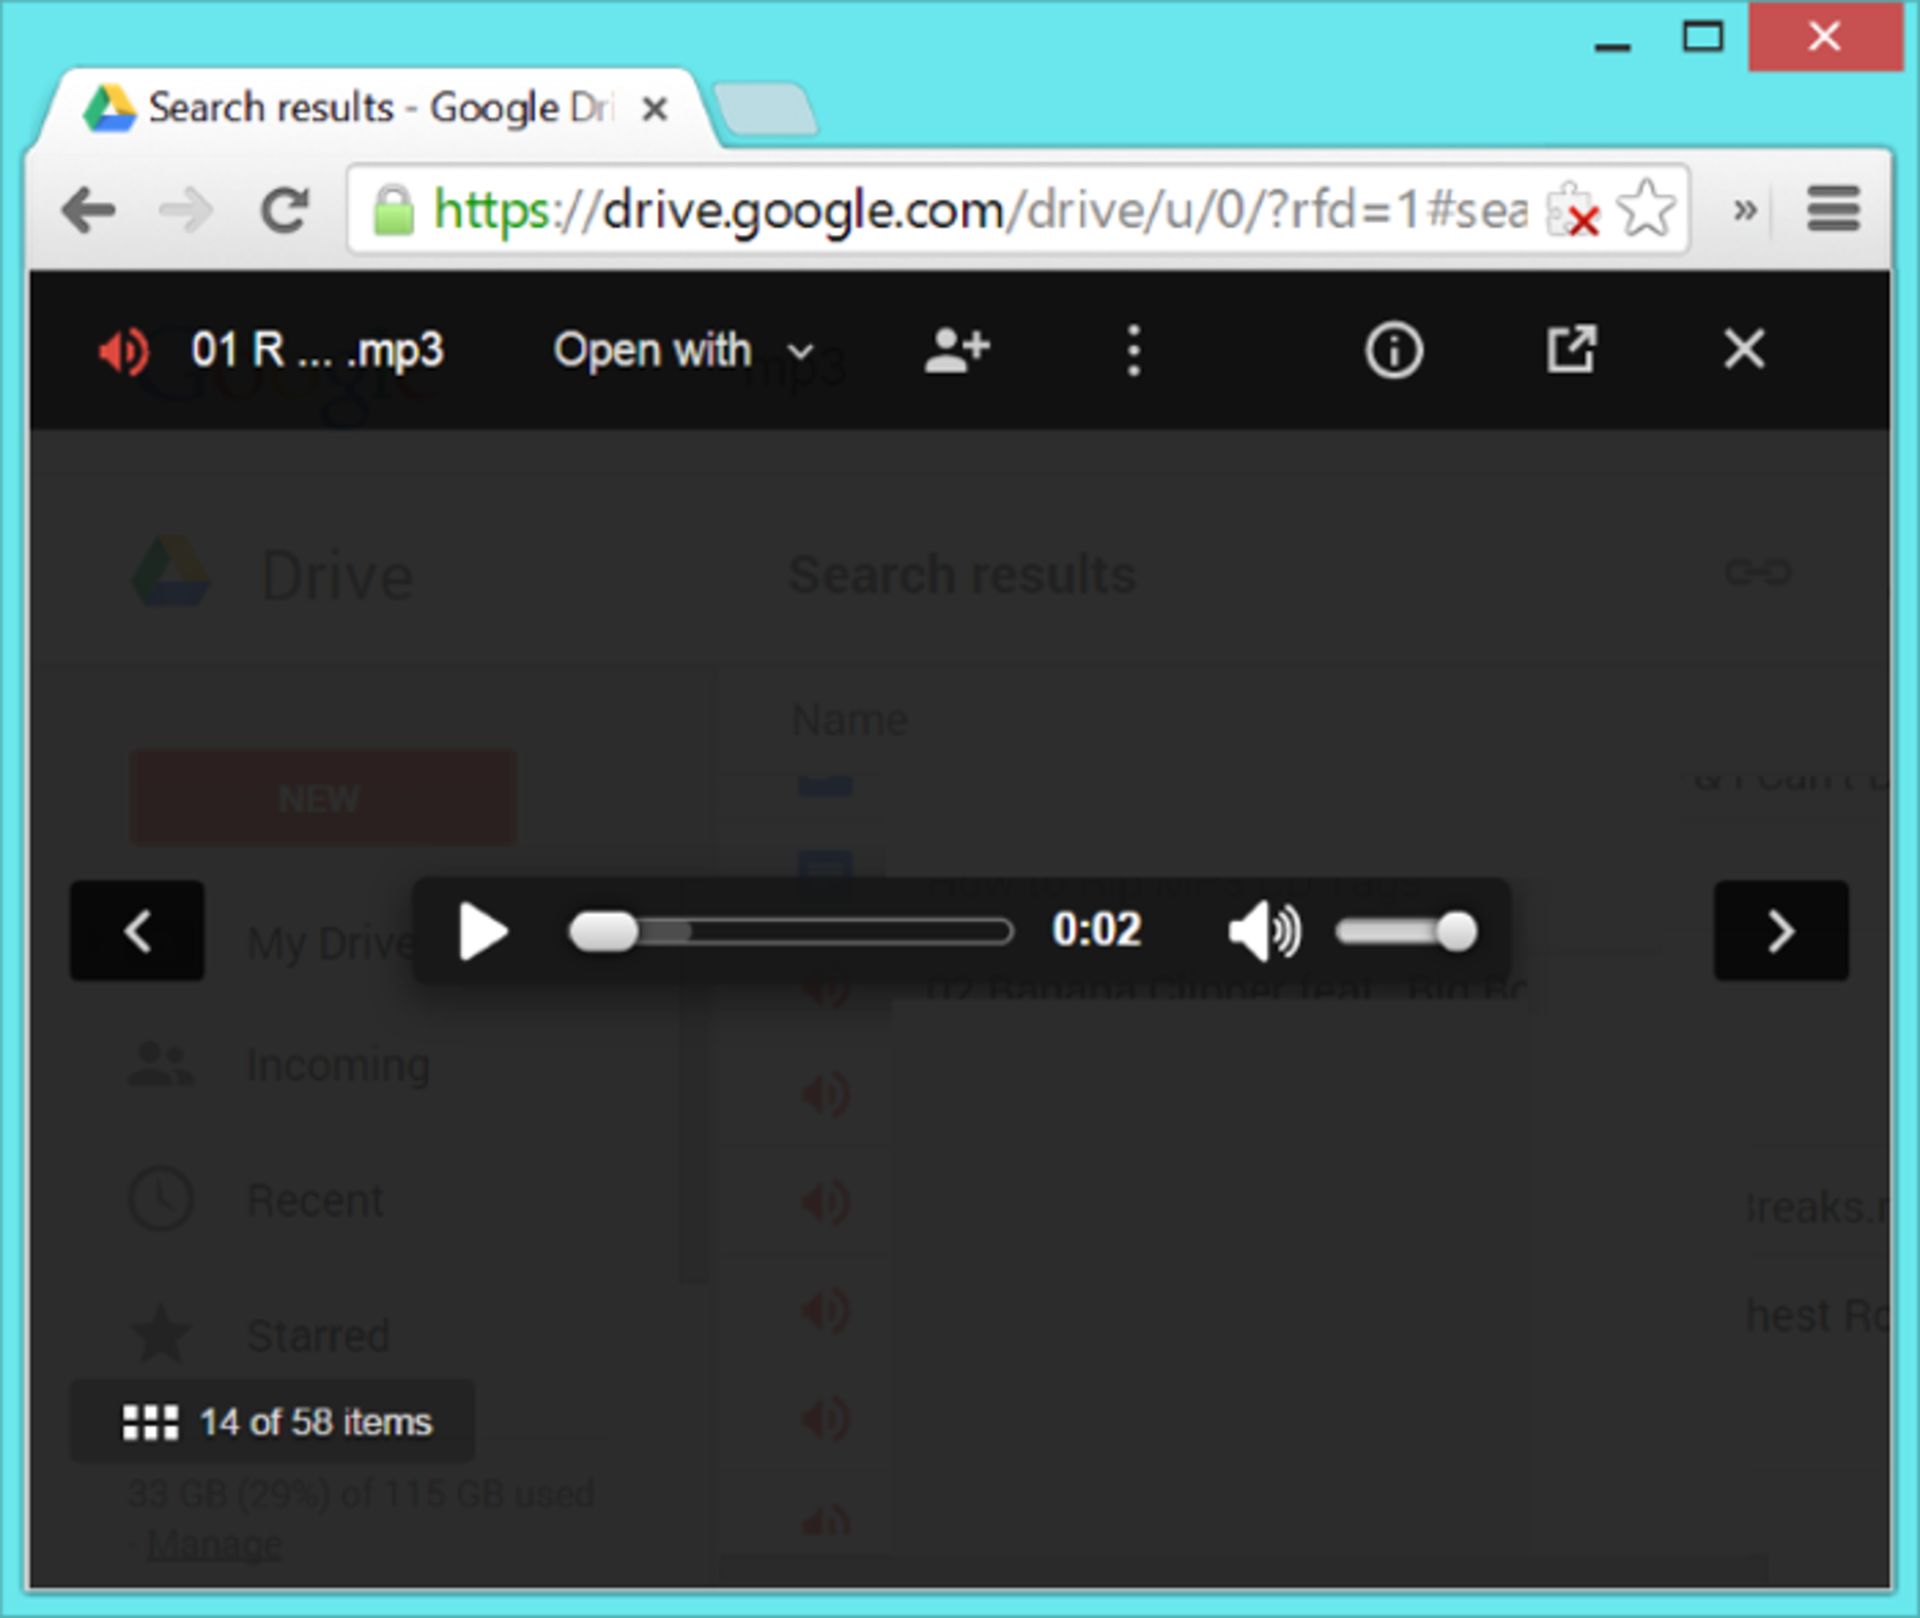 650x548xplaying-uploaded-mp3-in-google-drive.png.pagespeed.ic.cg71i8h8Zk